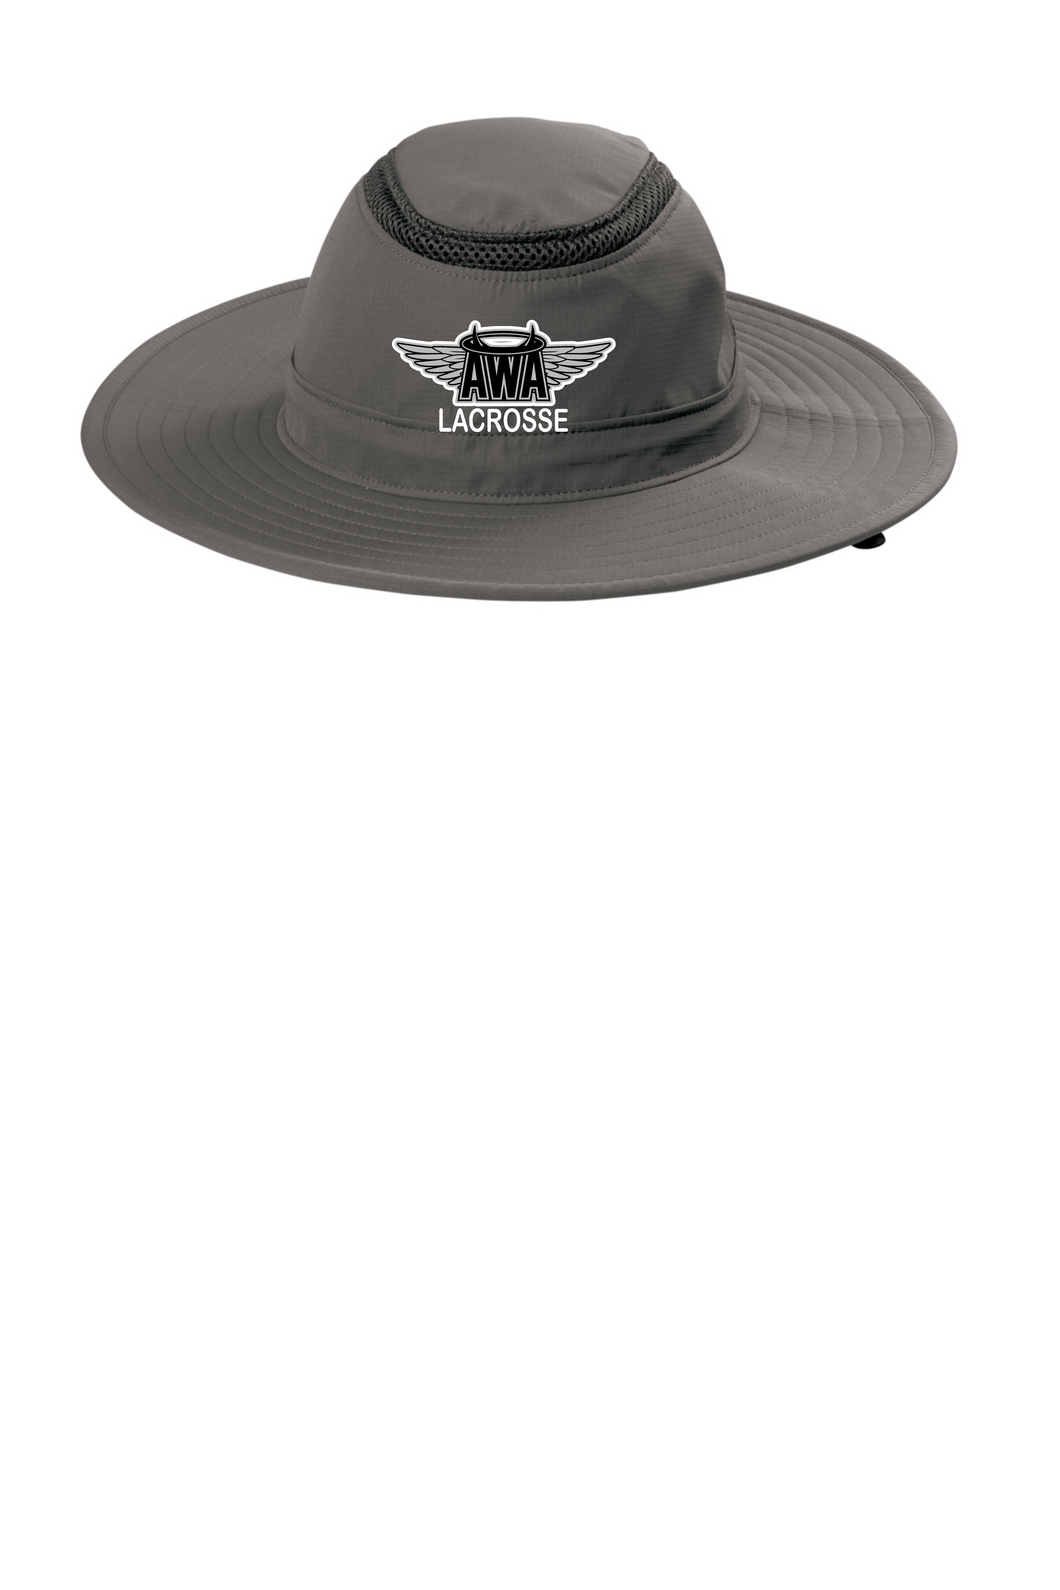 AWA-LAX-913-1 - Port Authority Outdoor Ventilated Wide Brim Hat - AWA Lacrosse Logo